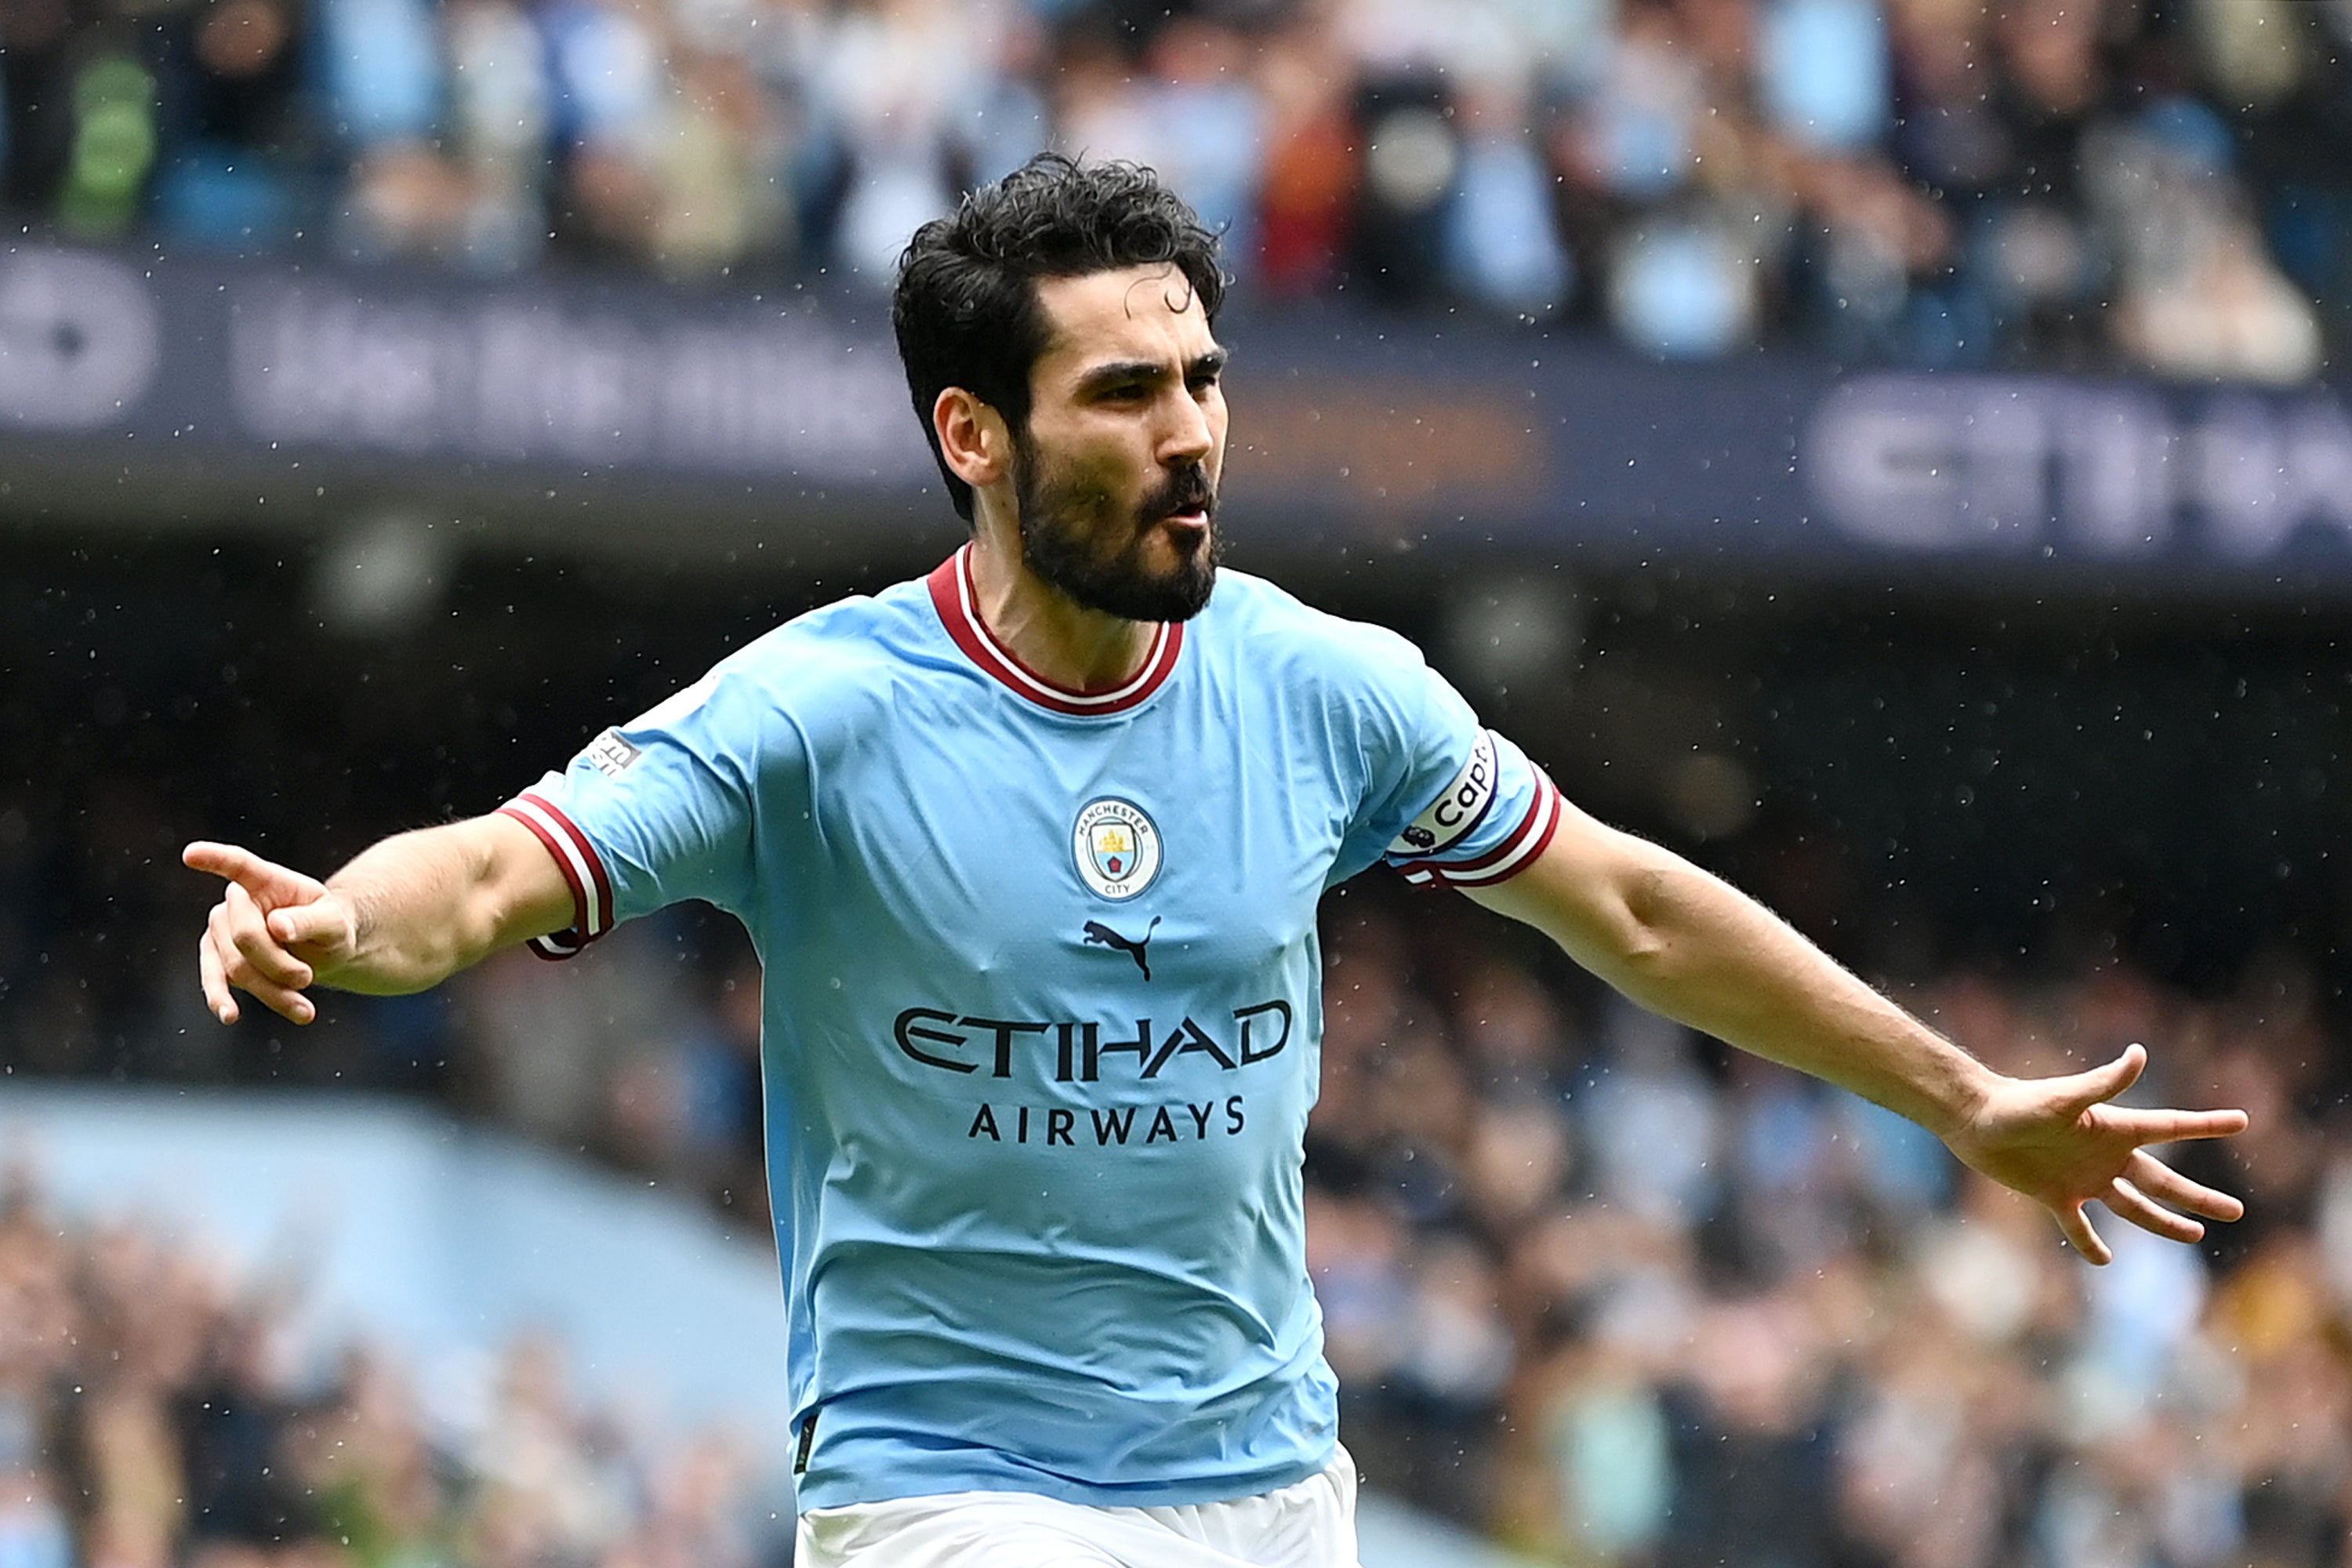 Ilkay Gundogan saved his goals for the biggest occasions